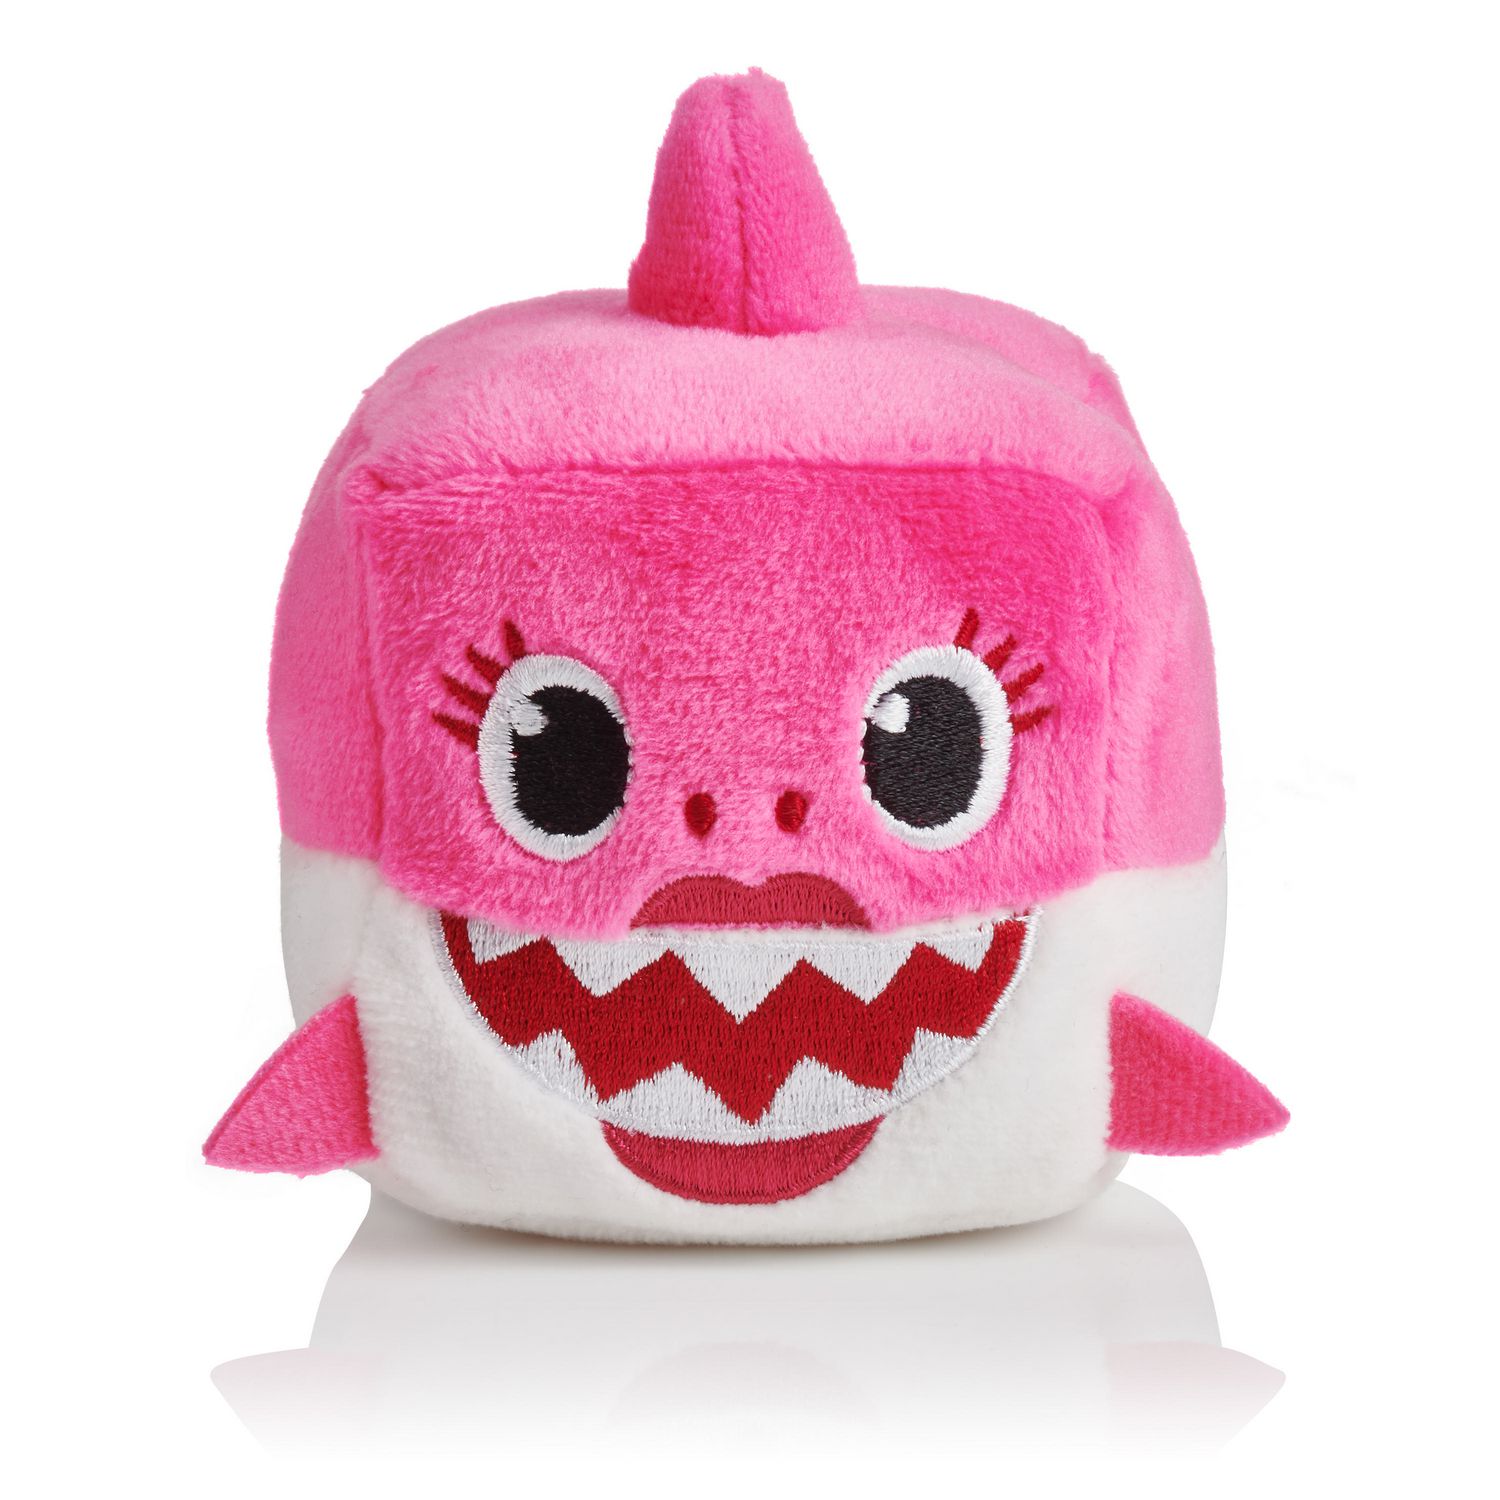 pinkfong baby shark official song cube